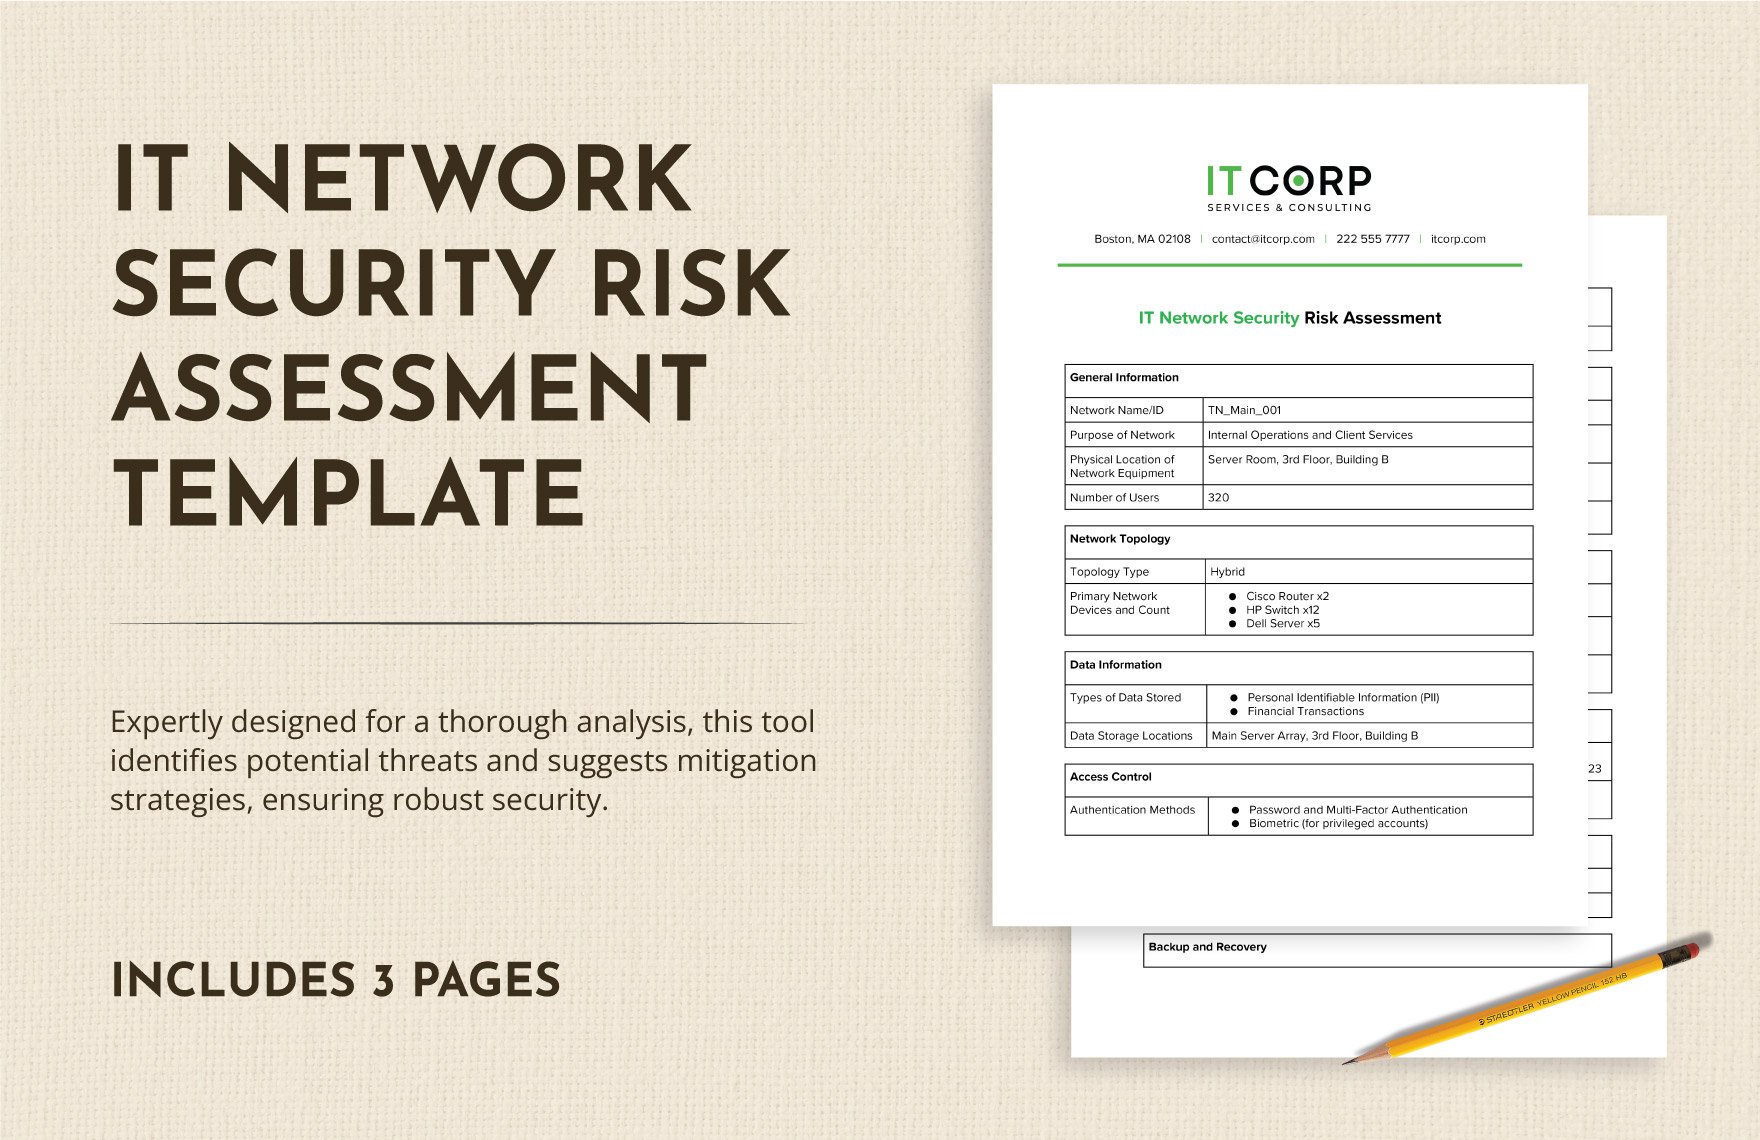 IT Network Security Risk Assessment Template